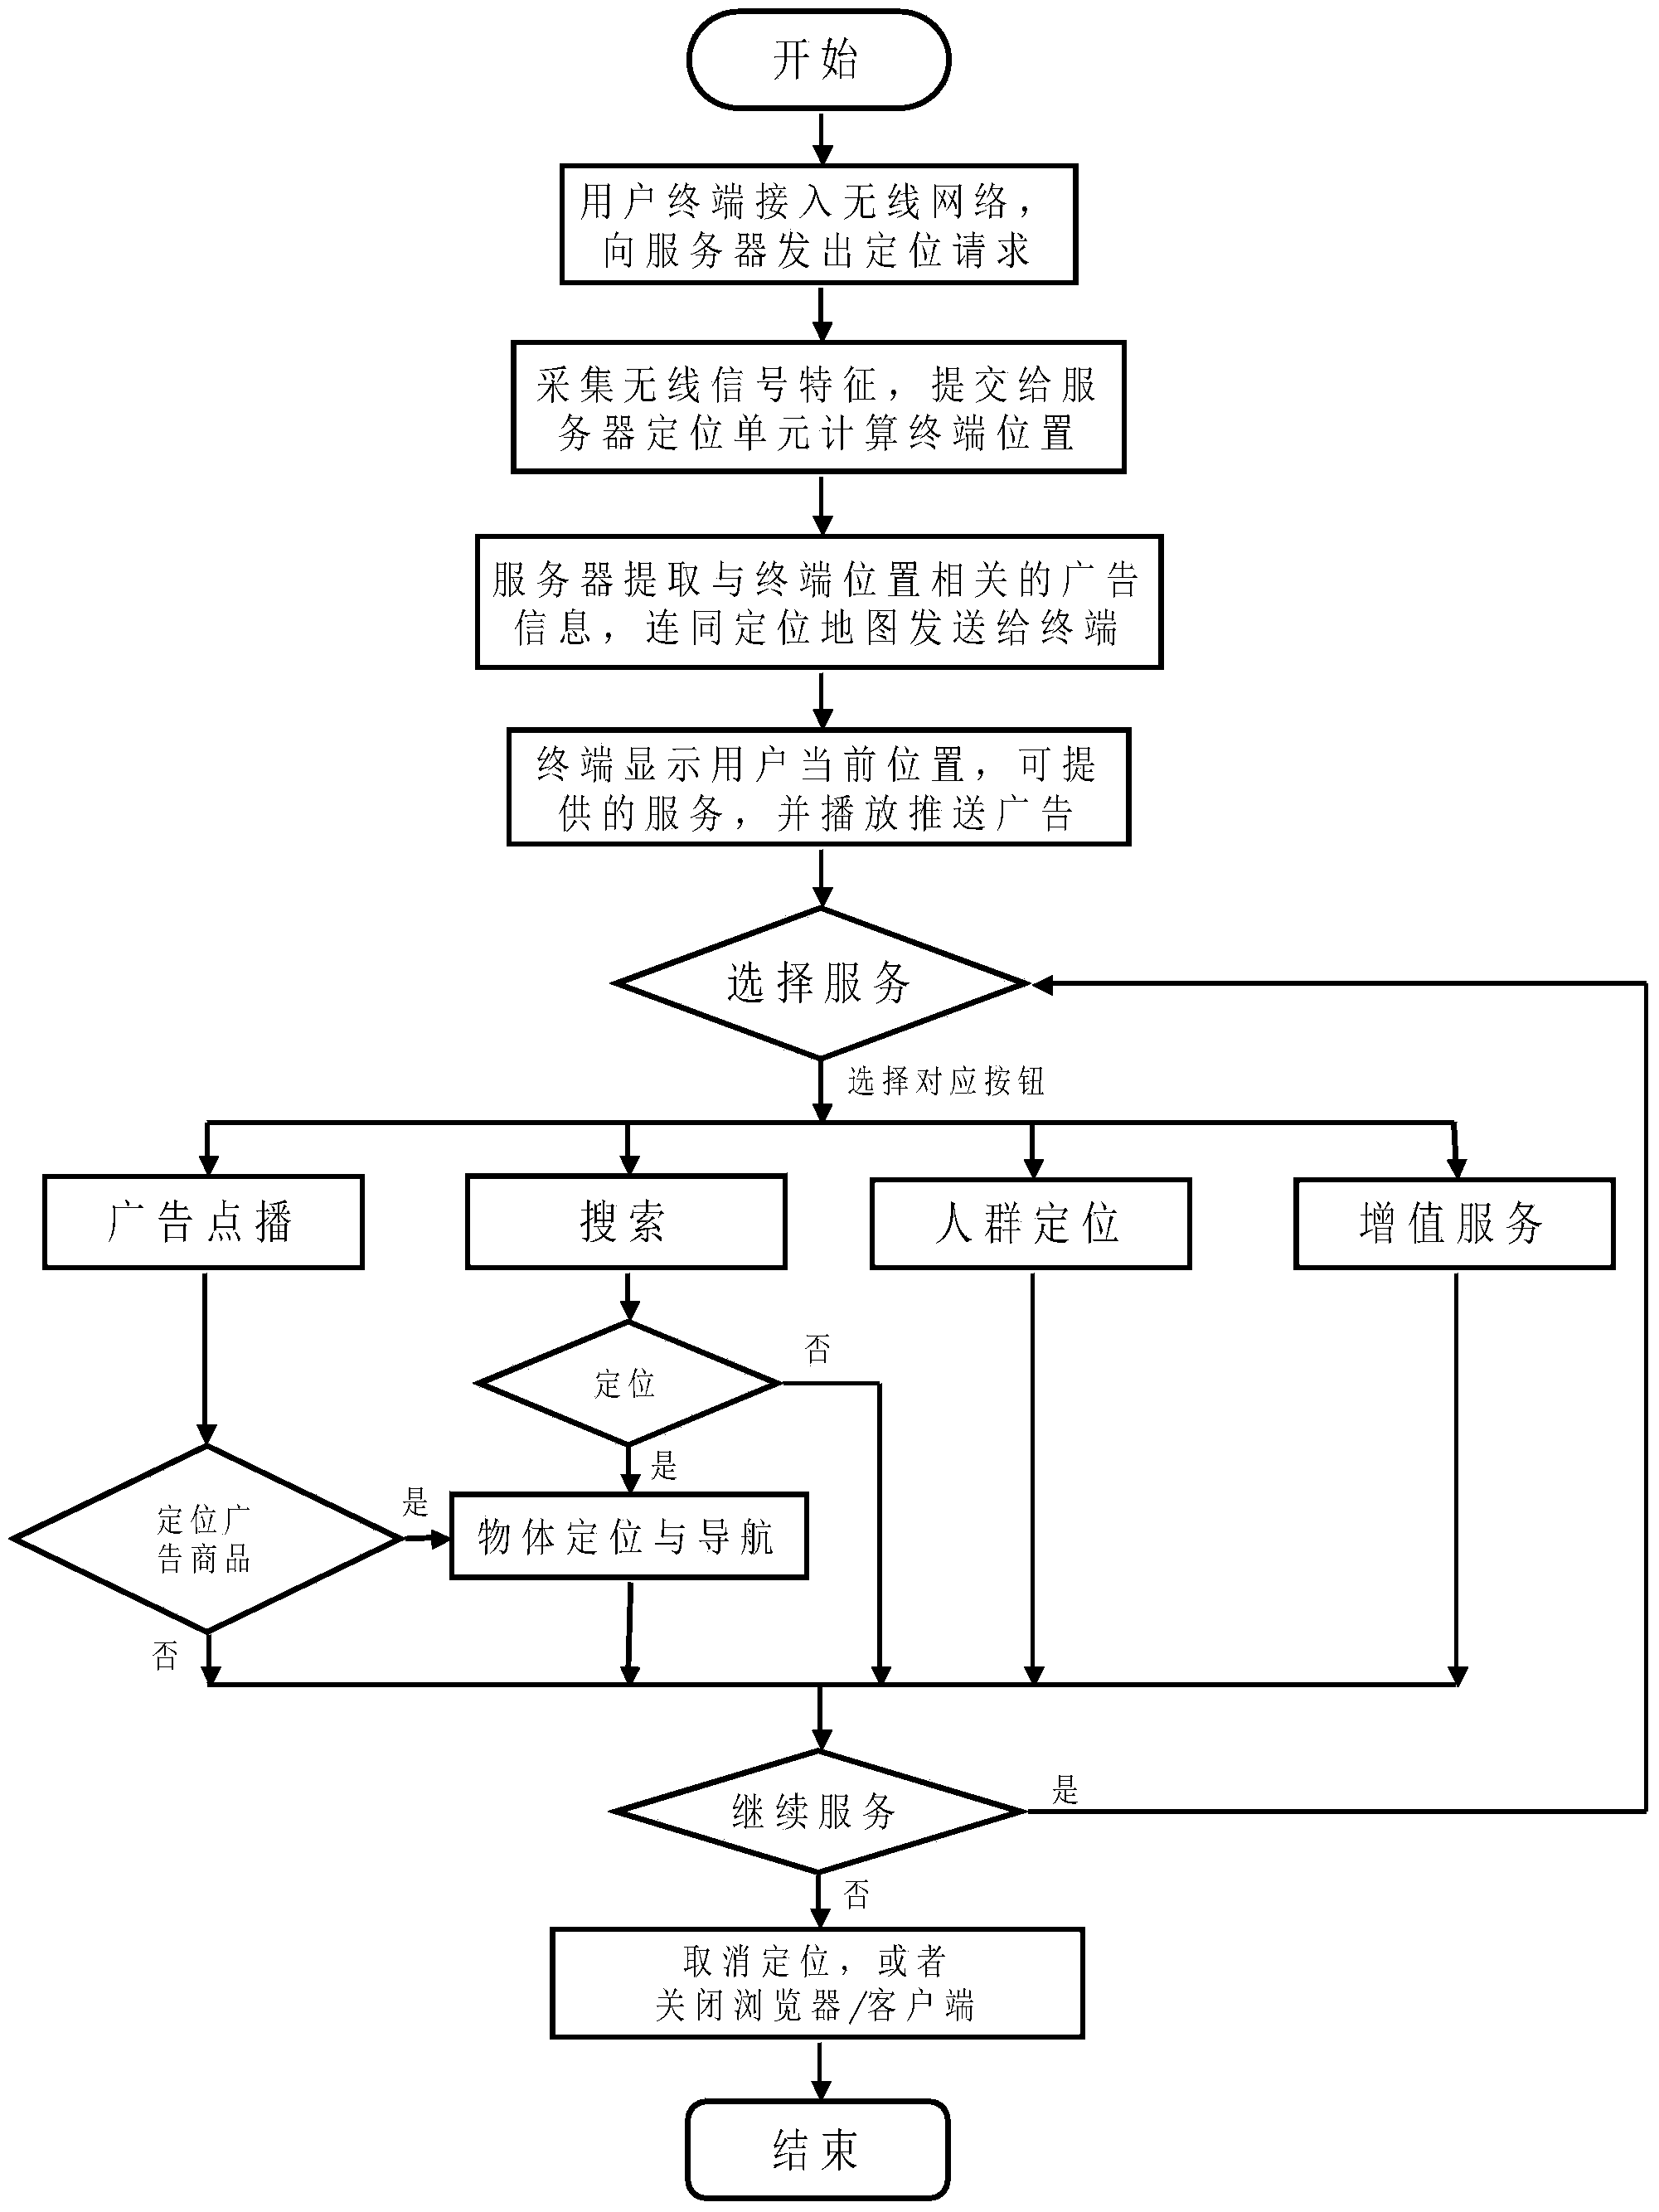 Mobile terminal push service method based on Wi-Fi positioning